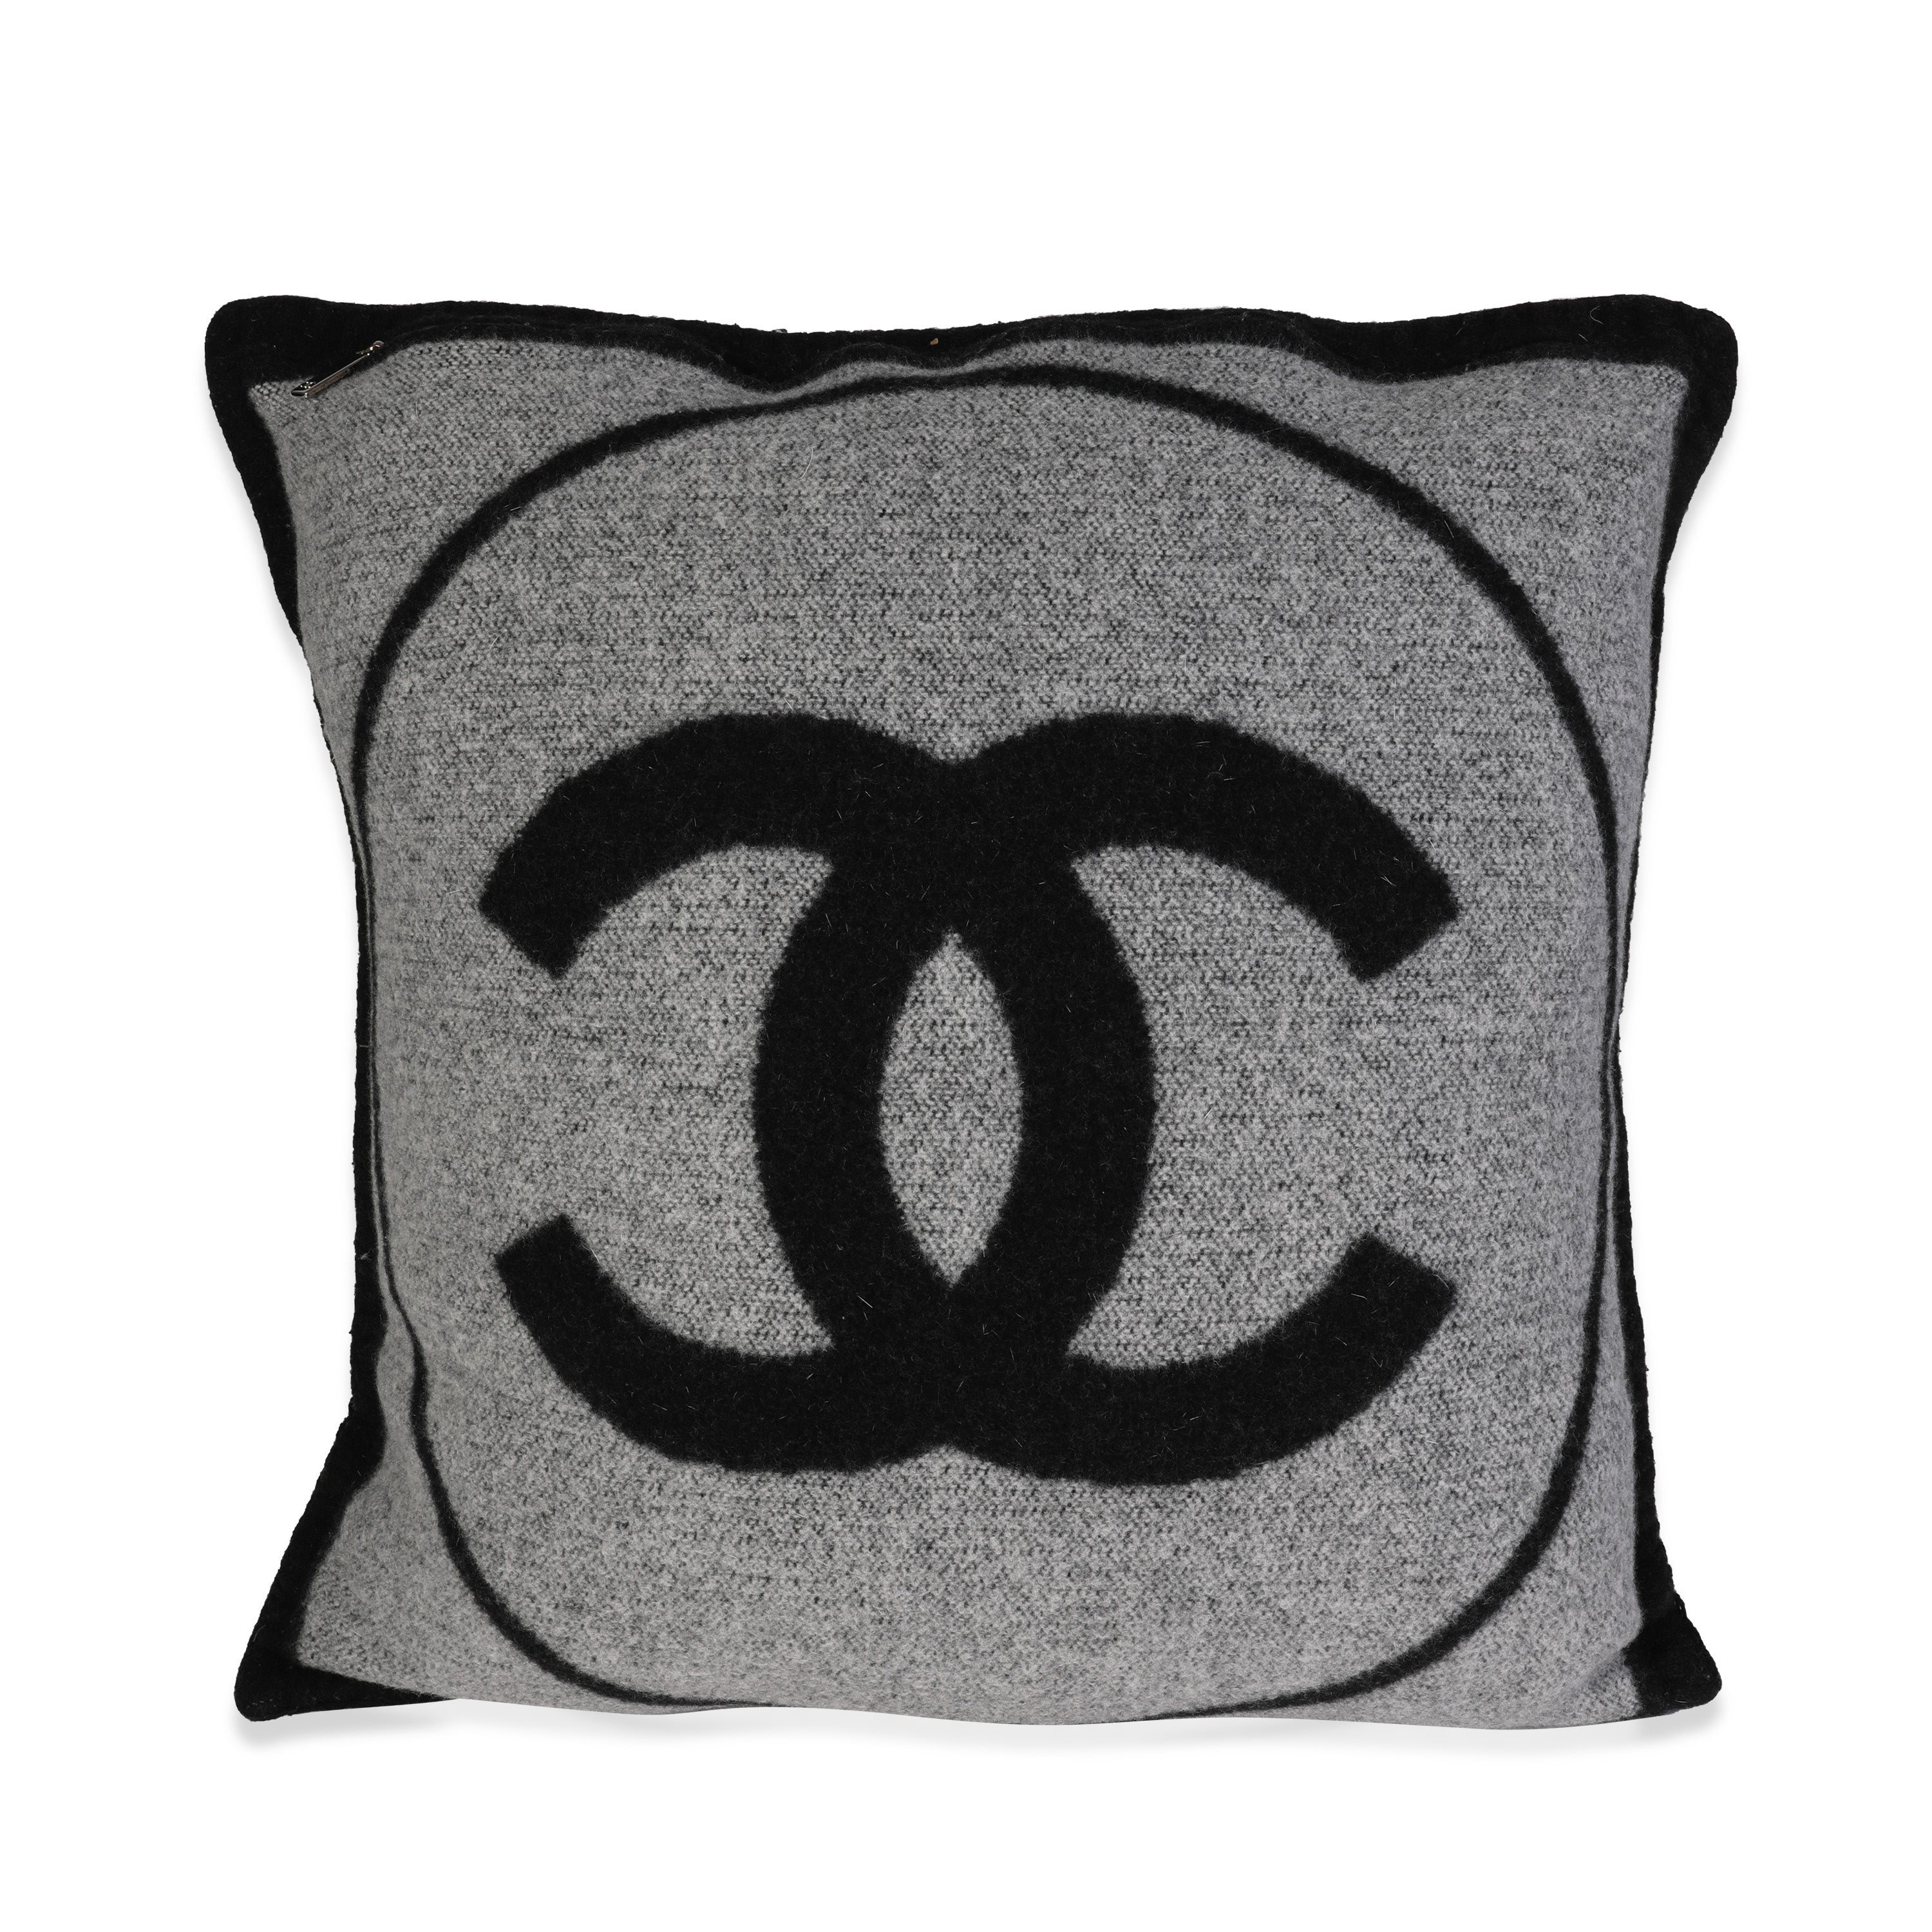 Authentic Chanel Couch Bedding Set Wool Cashmere Soft Throw Pillow Frill  Blanket 